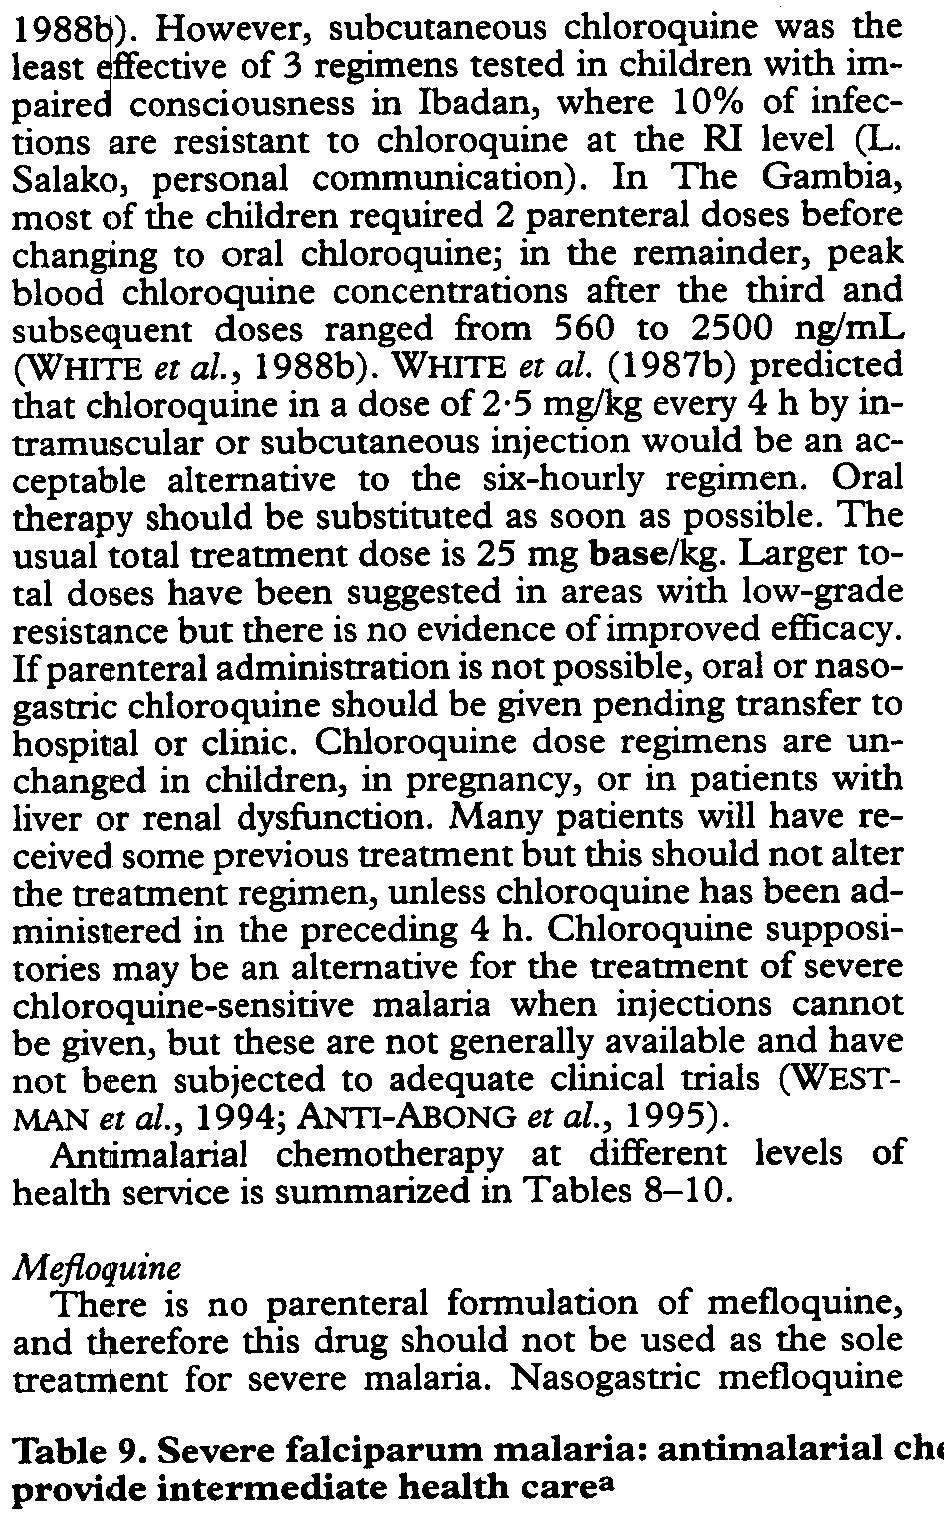 TRAN$ACI1ONS OFTHE ROYAL SOCIETY OF TROPICAL MEDICINE AND HYGIENE (2000) 94, SUPPLEMENT 81139 1988 ).